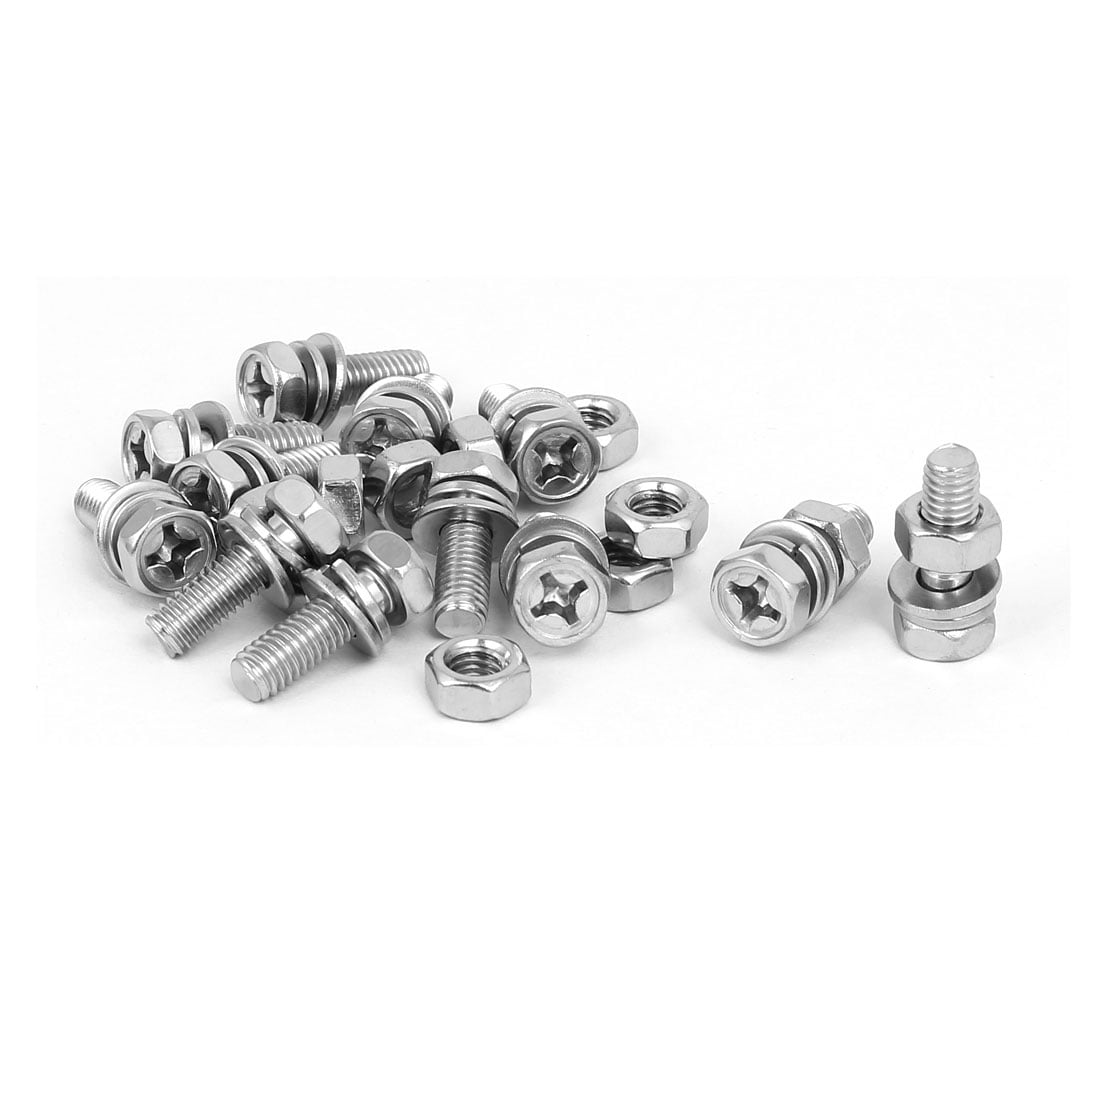 5.5mm A2 STAINLESS HEX TEK SELF CUTTING DRILLING TAPPING SCREWS & WASHERS 